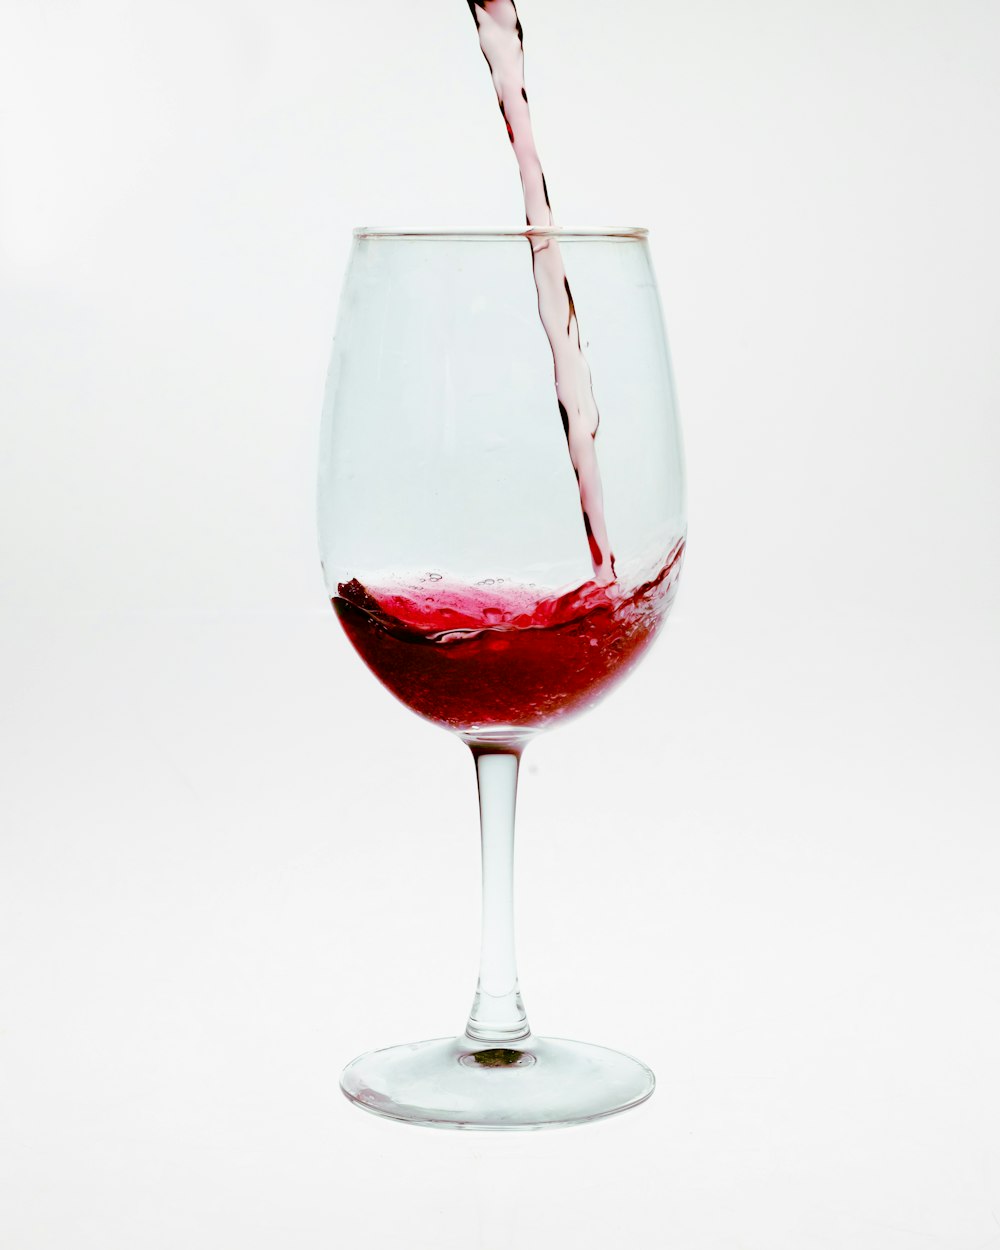 a wine glass filled with red wine being poured into it